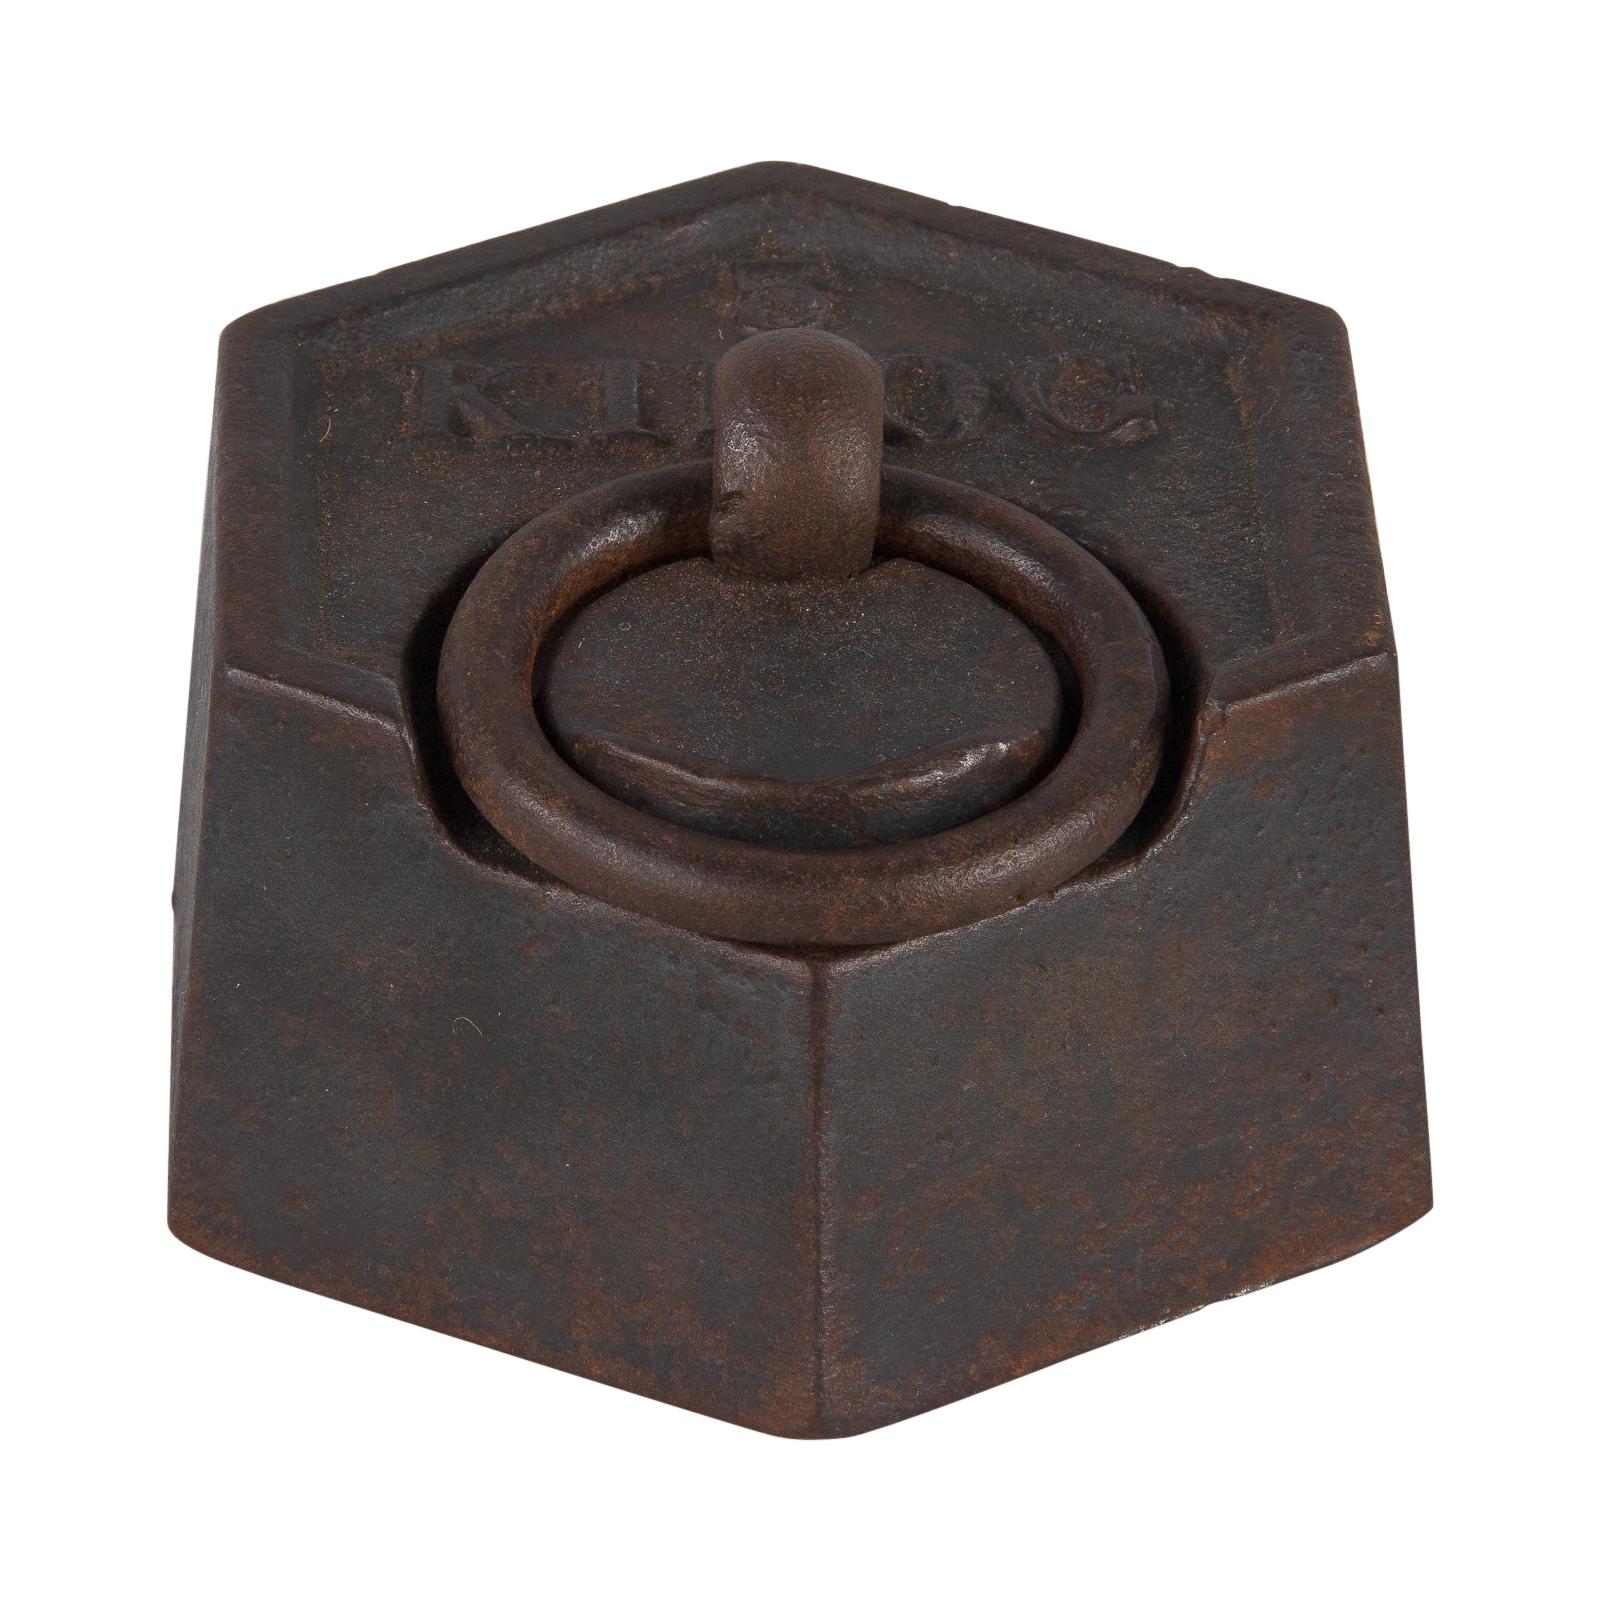 Five Kilogram Iron Scale Weight, France, Early 1900s